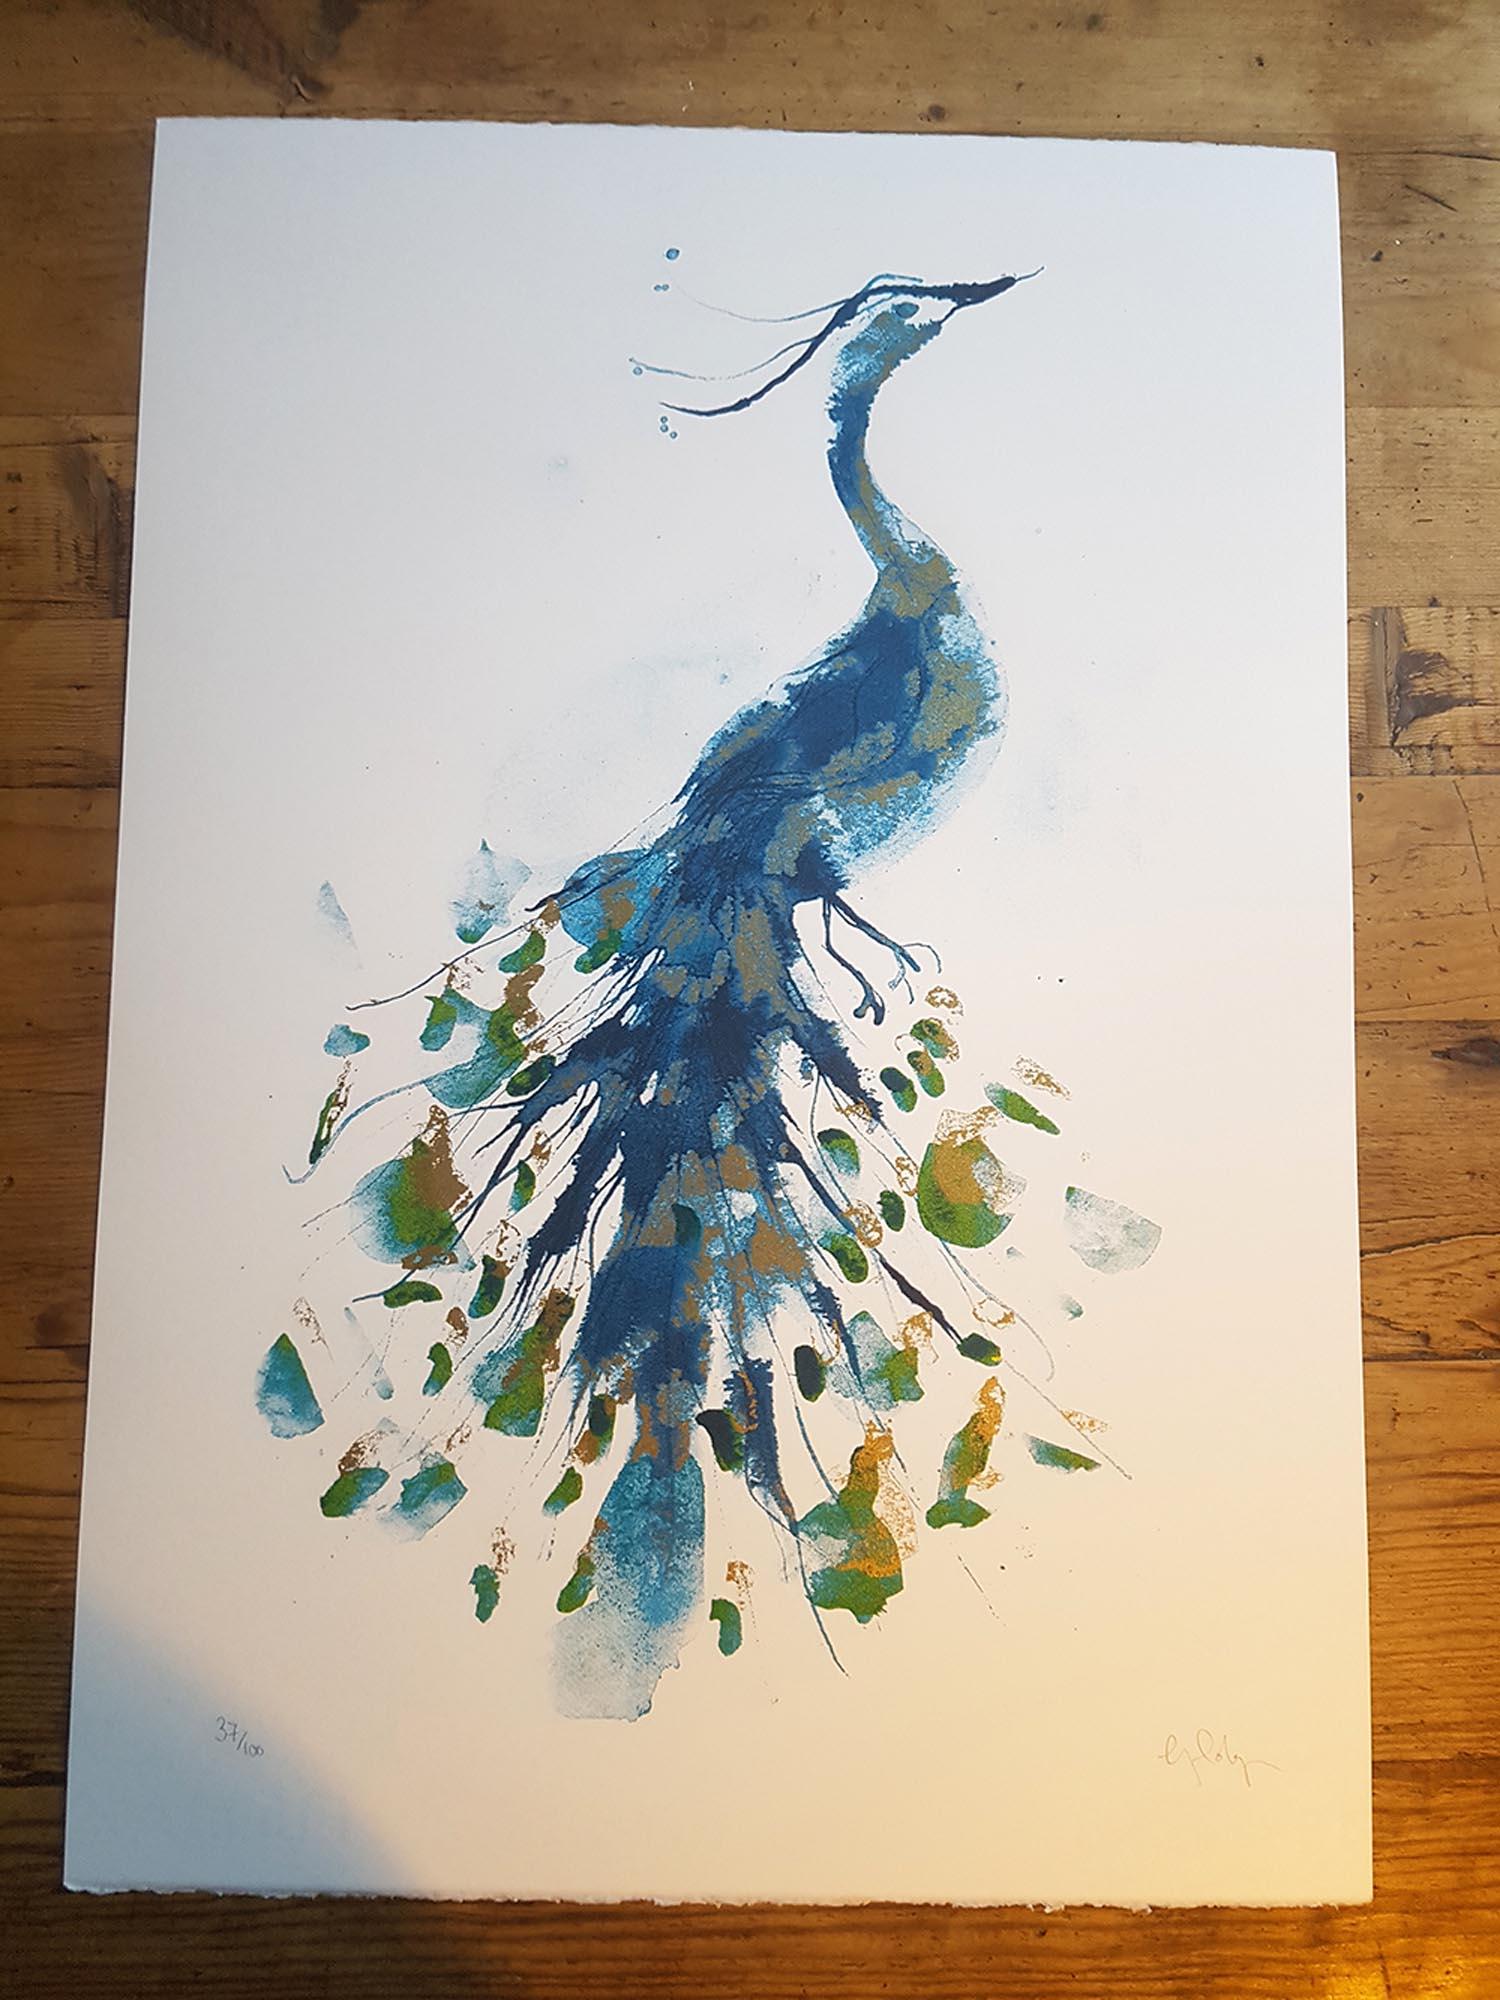 Peacock Gold
A beautiful CYMK silk screen print by Gavin Dobson. 
Based on an original watercolour painting of this iconic bird, this popular piece of art is individually hand printed by the artist using half tones to create the layered blues and